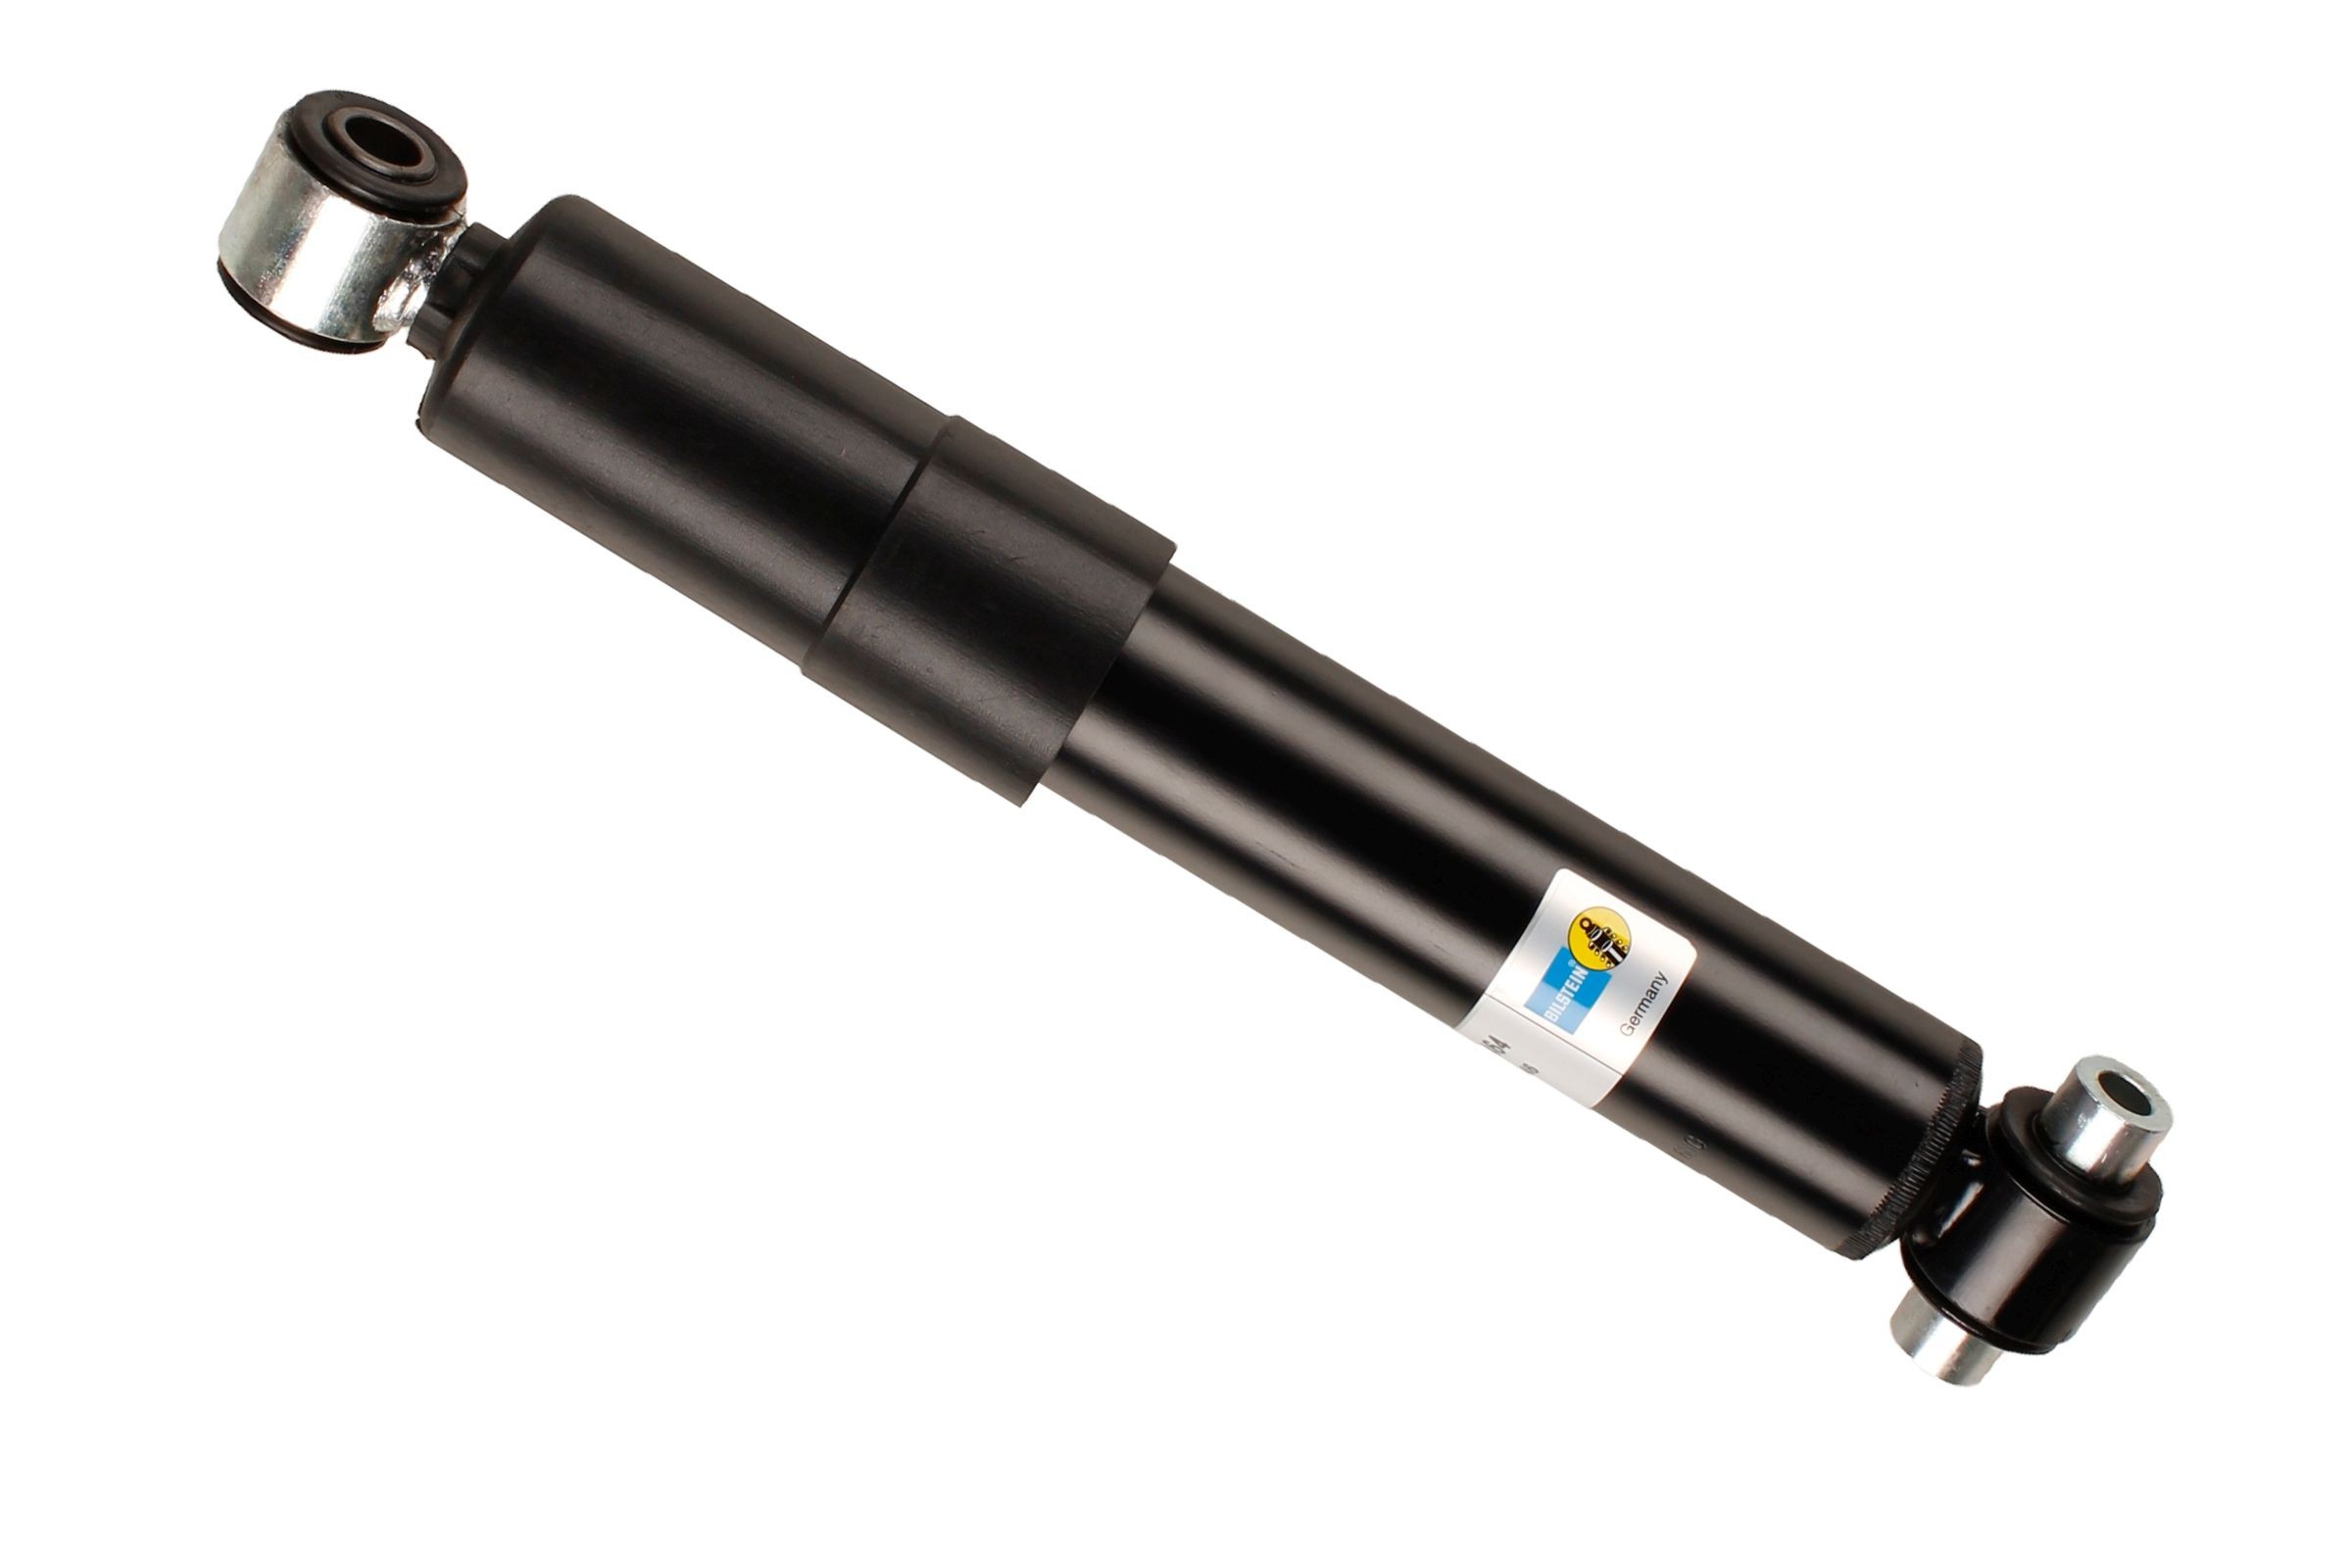 BILSTEIN - B4 OE Replacement 19-158464 Shock absorber Rear Axle, Gas Pressure, Twin-Tube, Absorber does not carry a spring, Top eye, Bottom eye